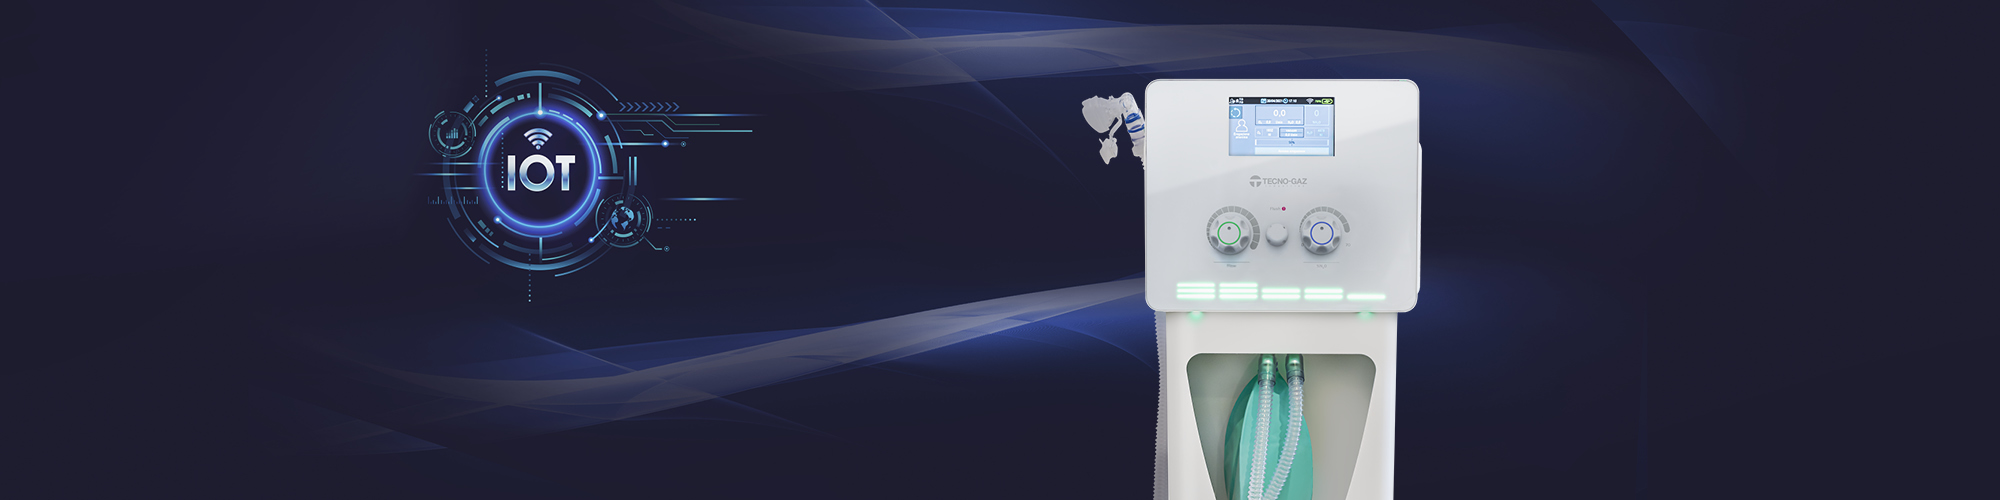 Masterflux Smart.The first 4.0 electronic conscious sedation system